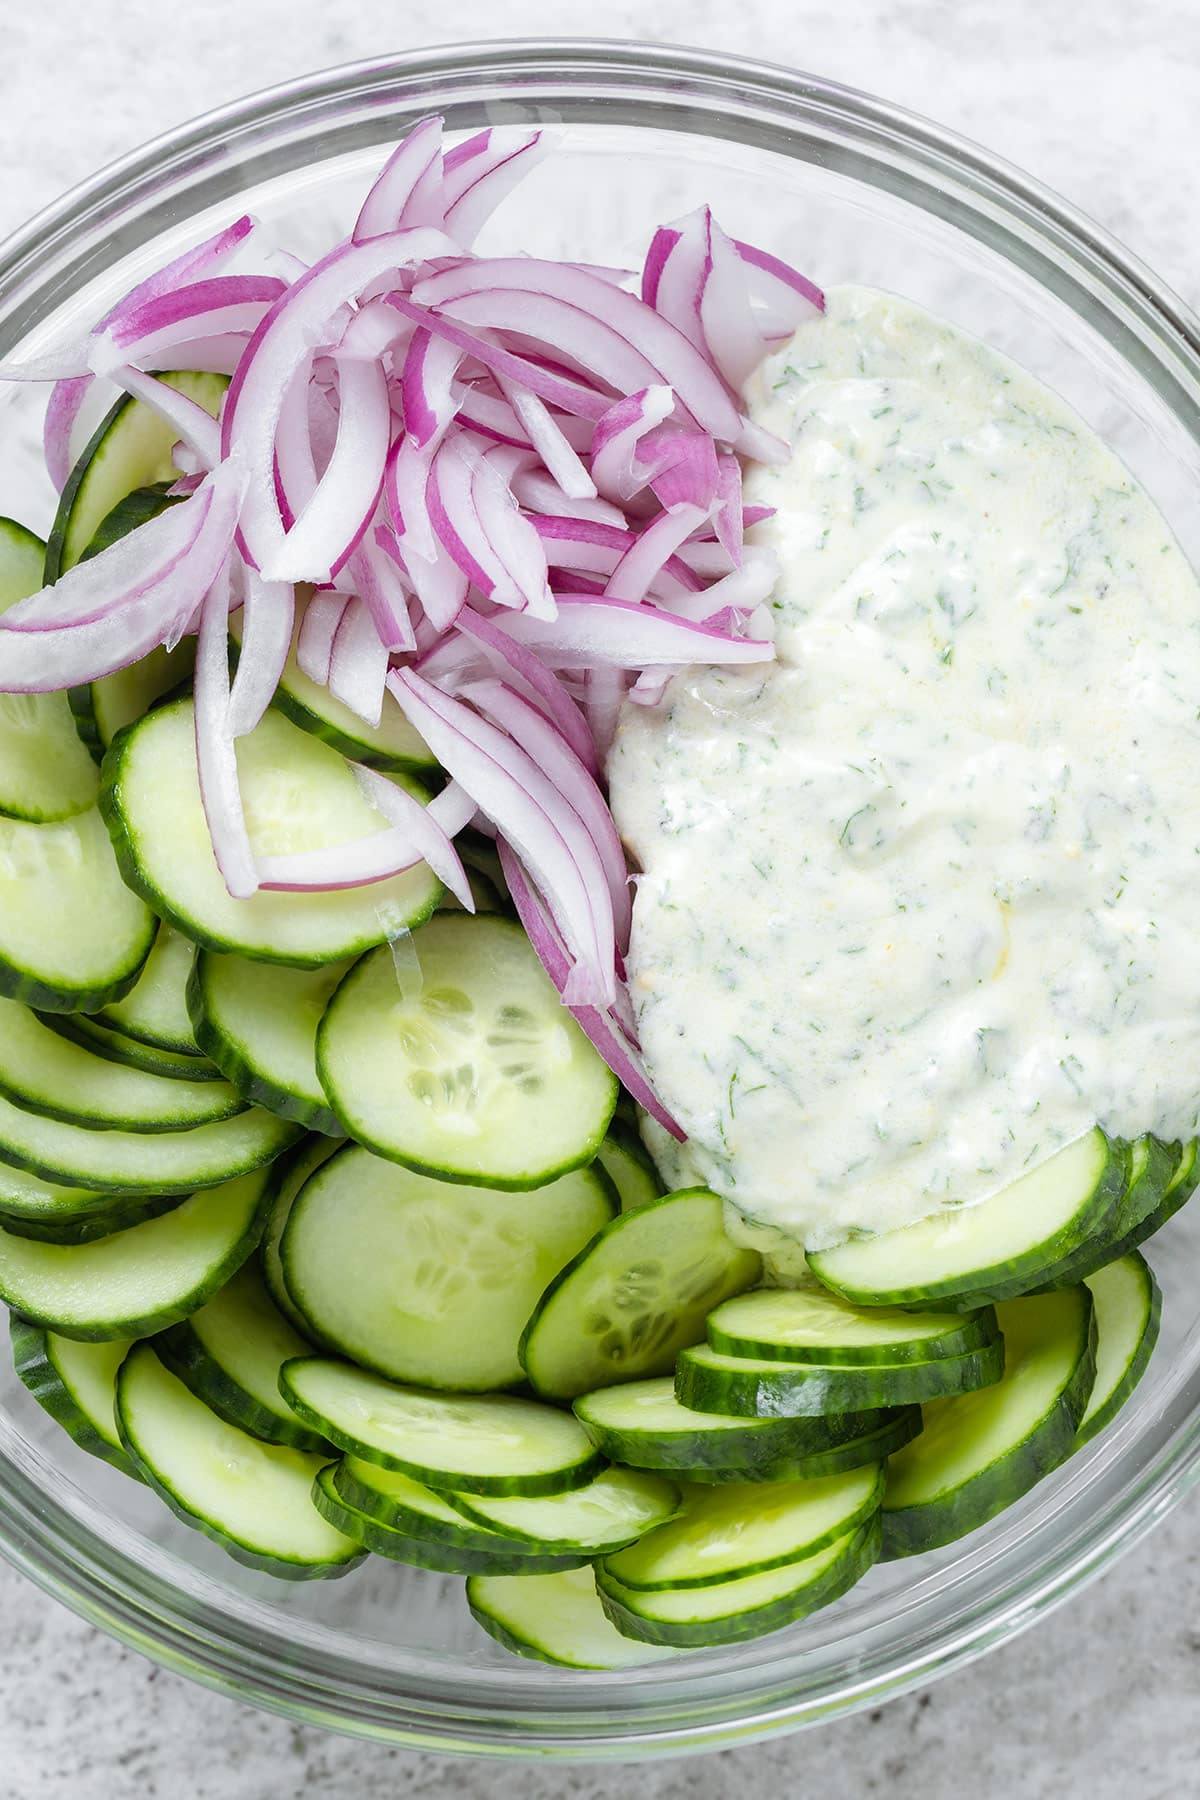 Sliced cucumber and red onion in a glass bowl with tzatziki dressing before mixing together.